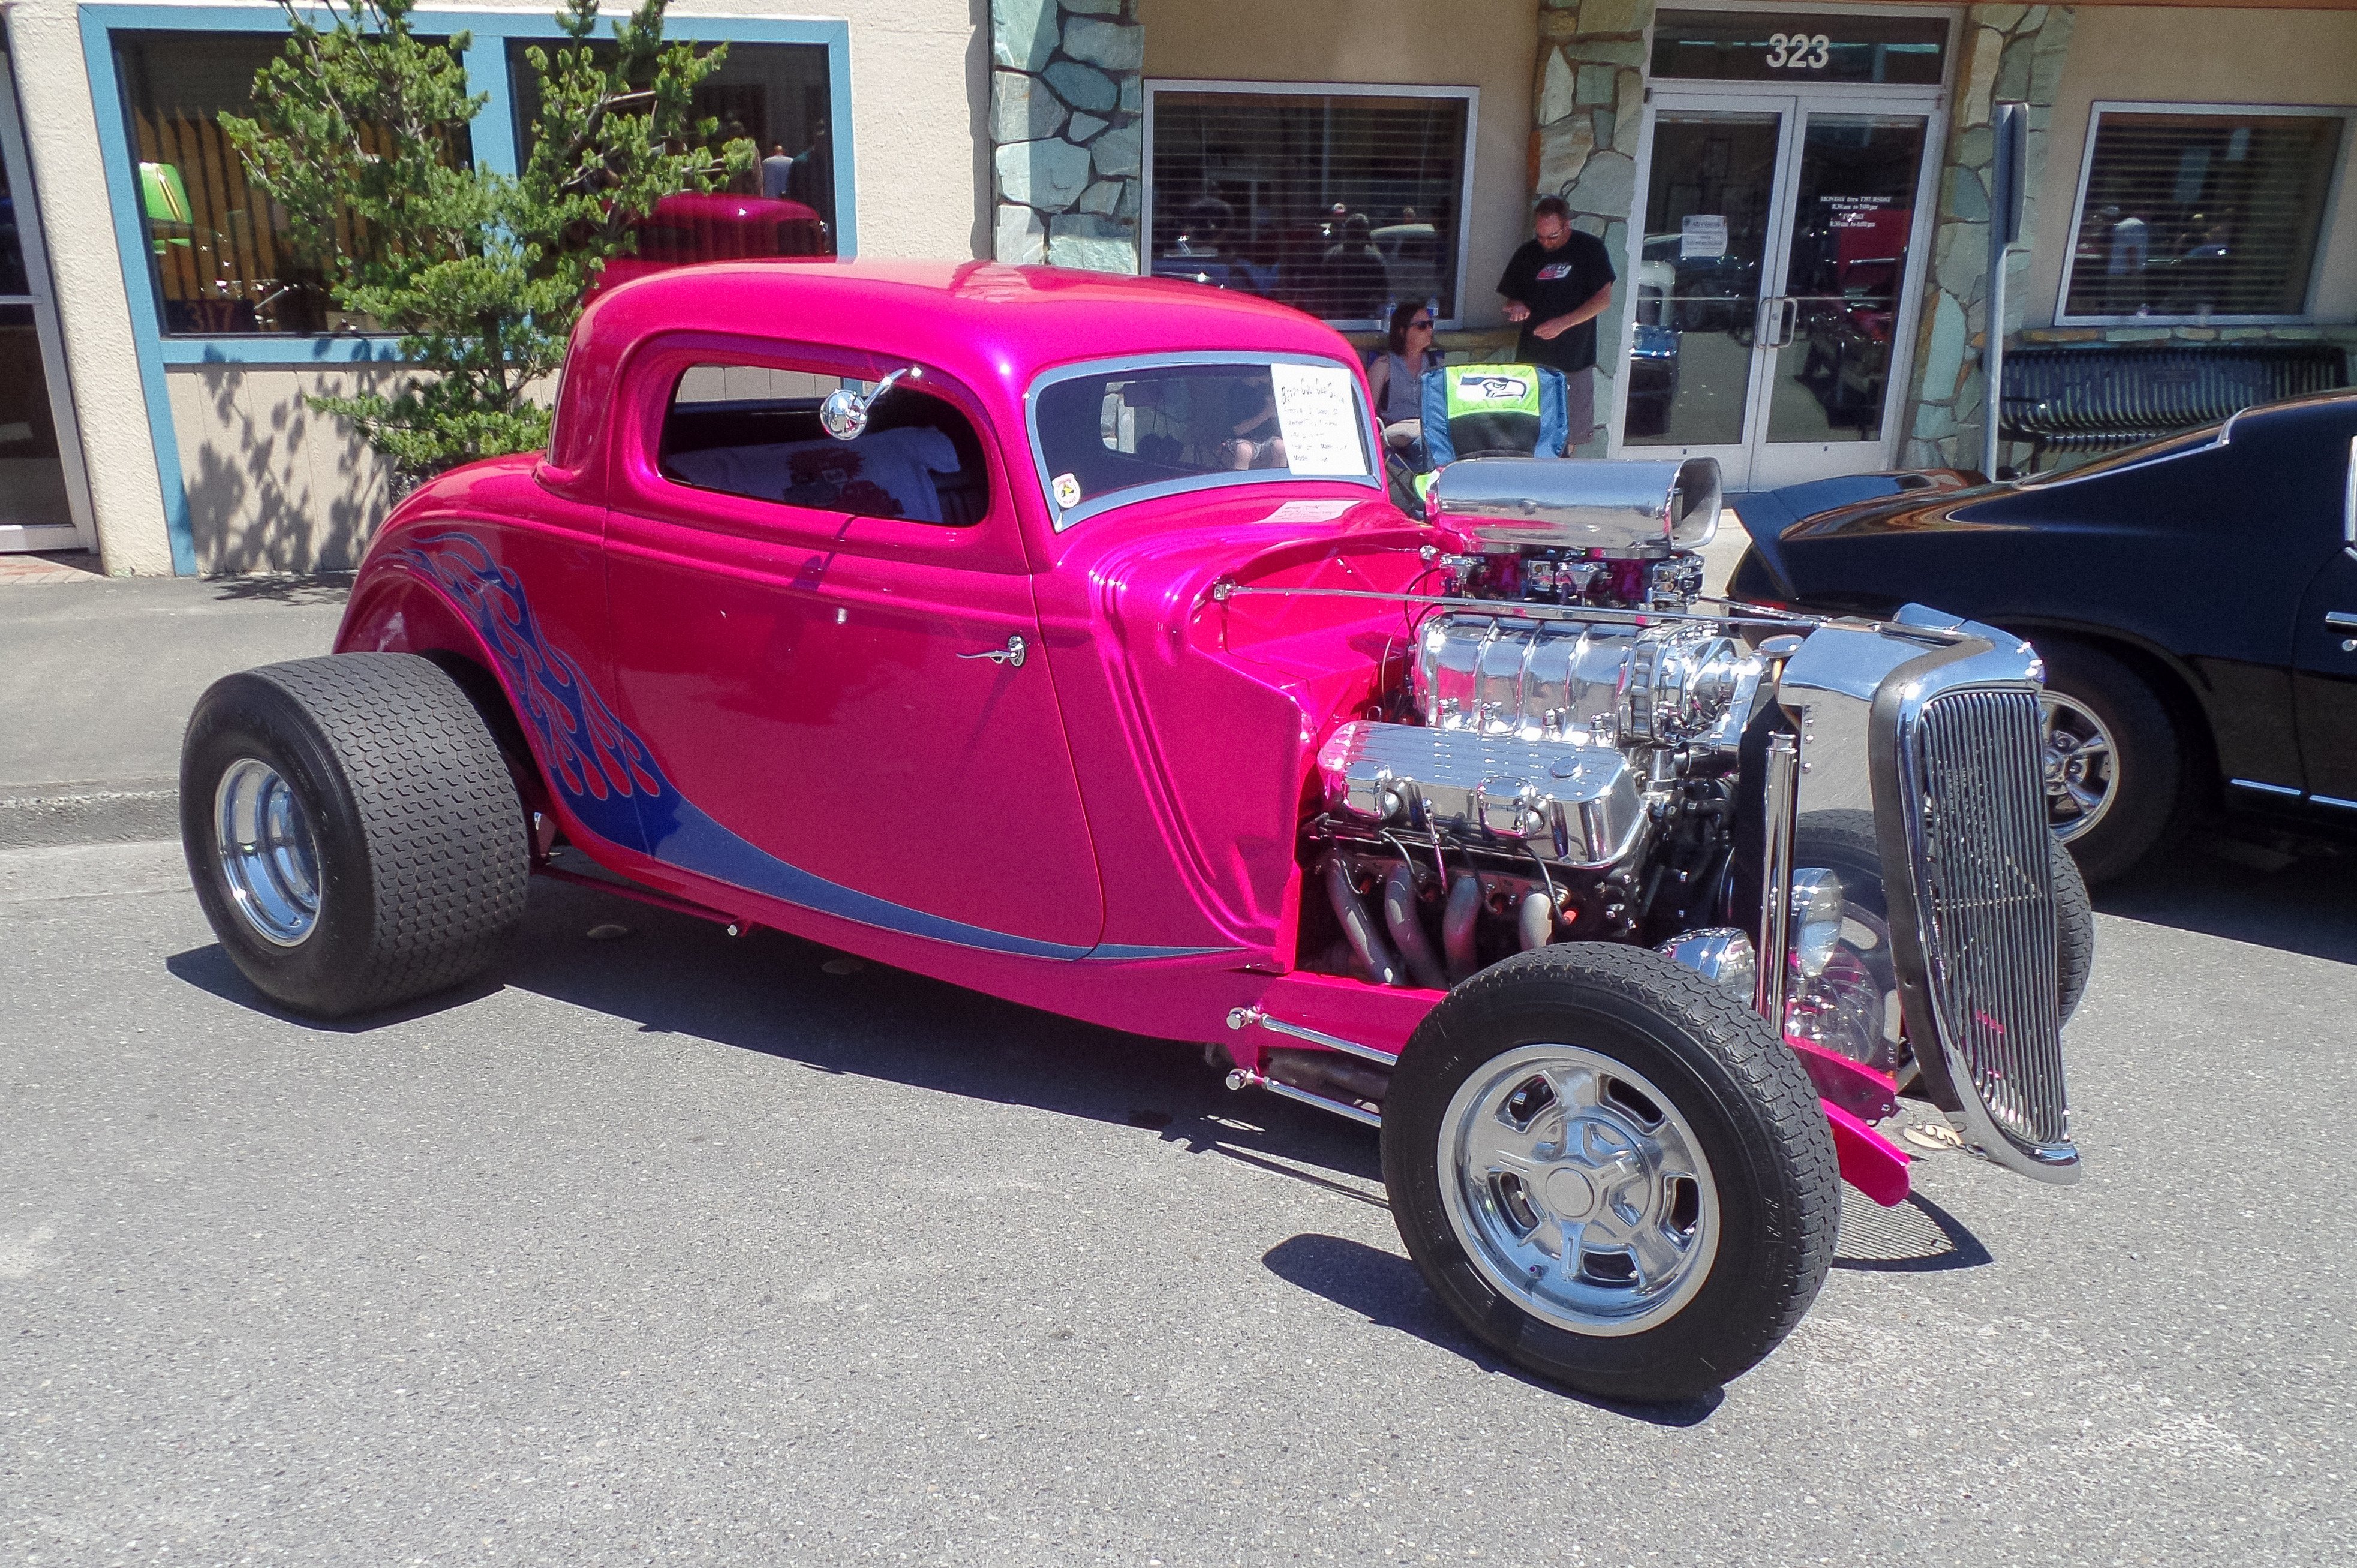 File:Pink Ford Hot Rod.jpg - Wikimedia Commons